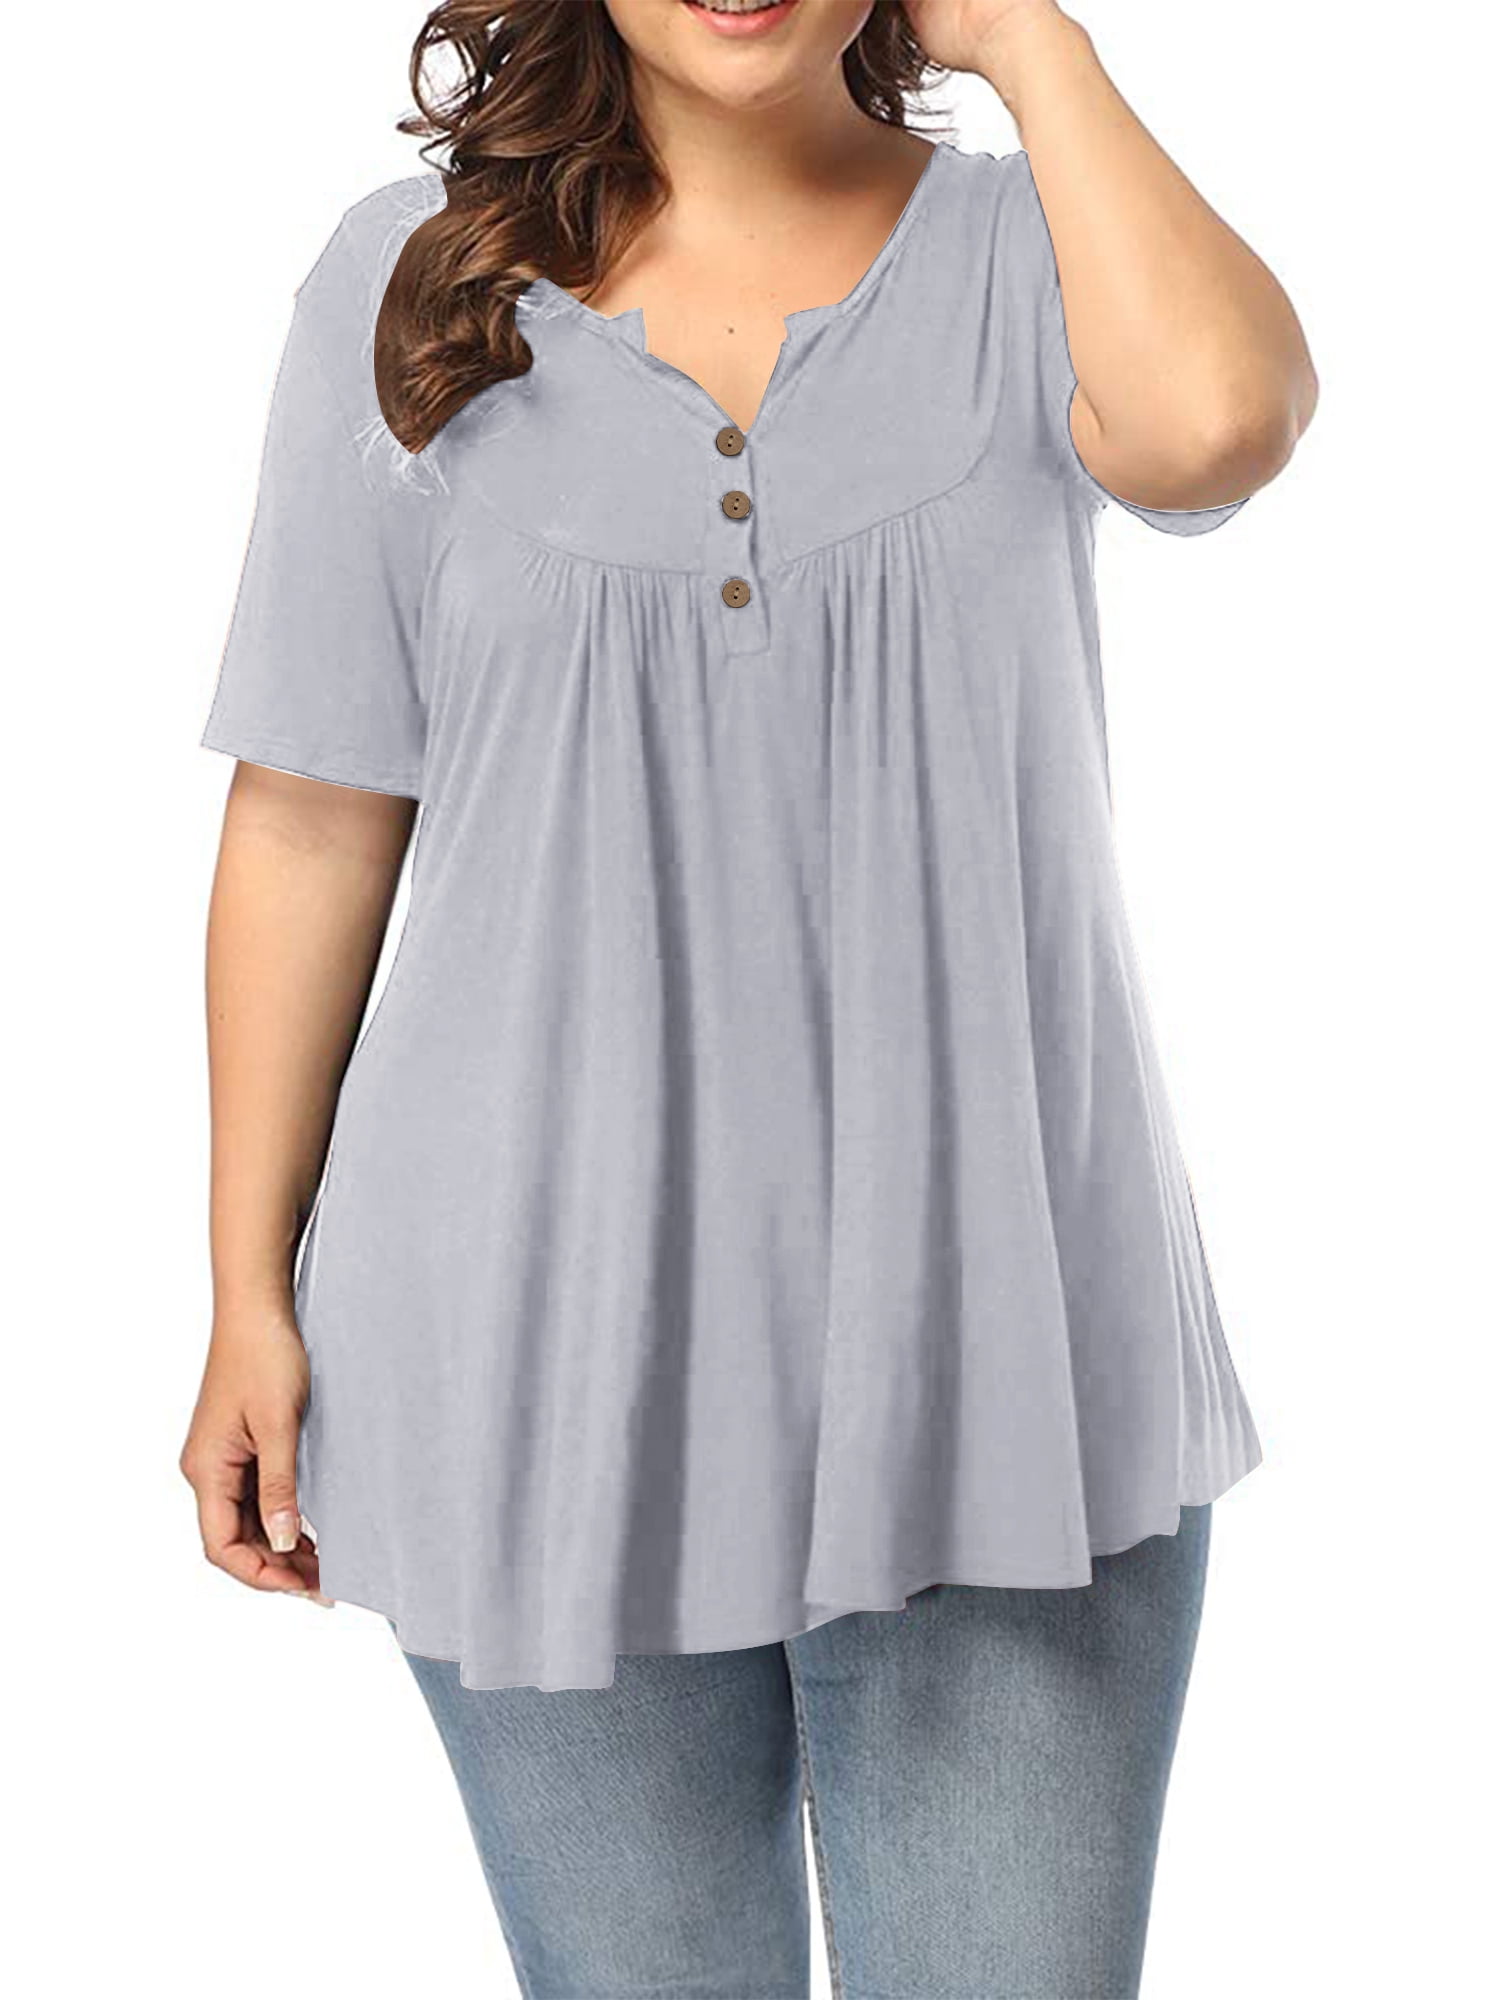 VISLILY Womens Plus-Size Tops Summer Henley Shirts Buttons up Blouses with Pocket 